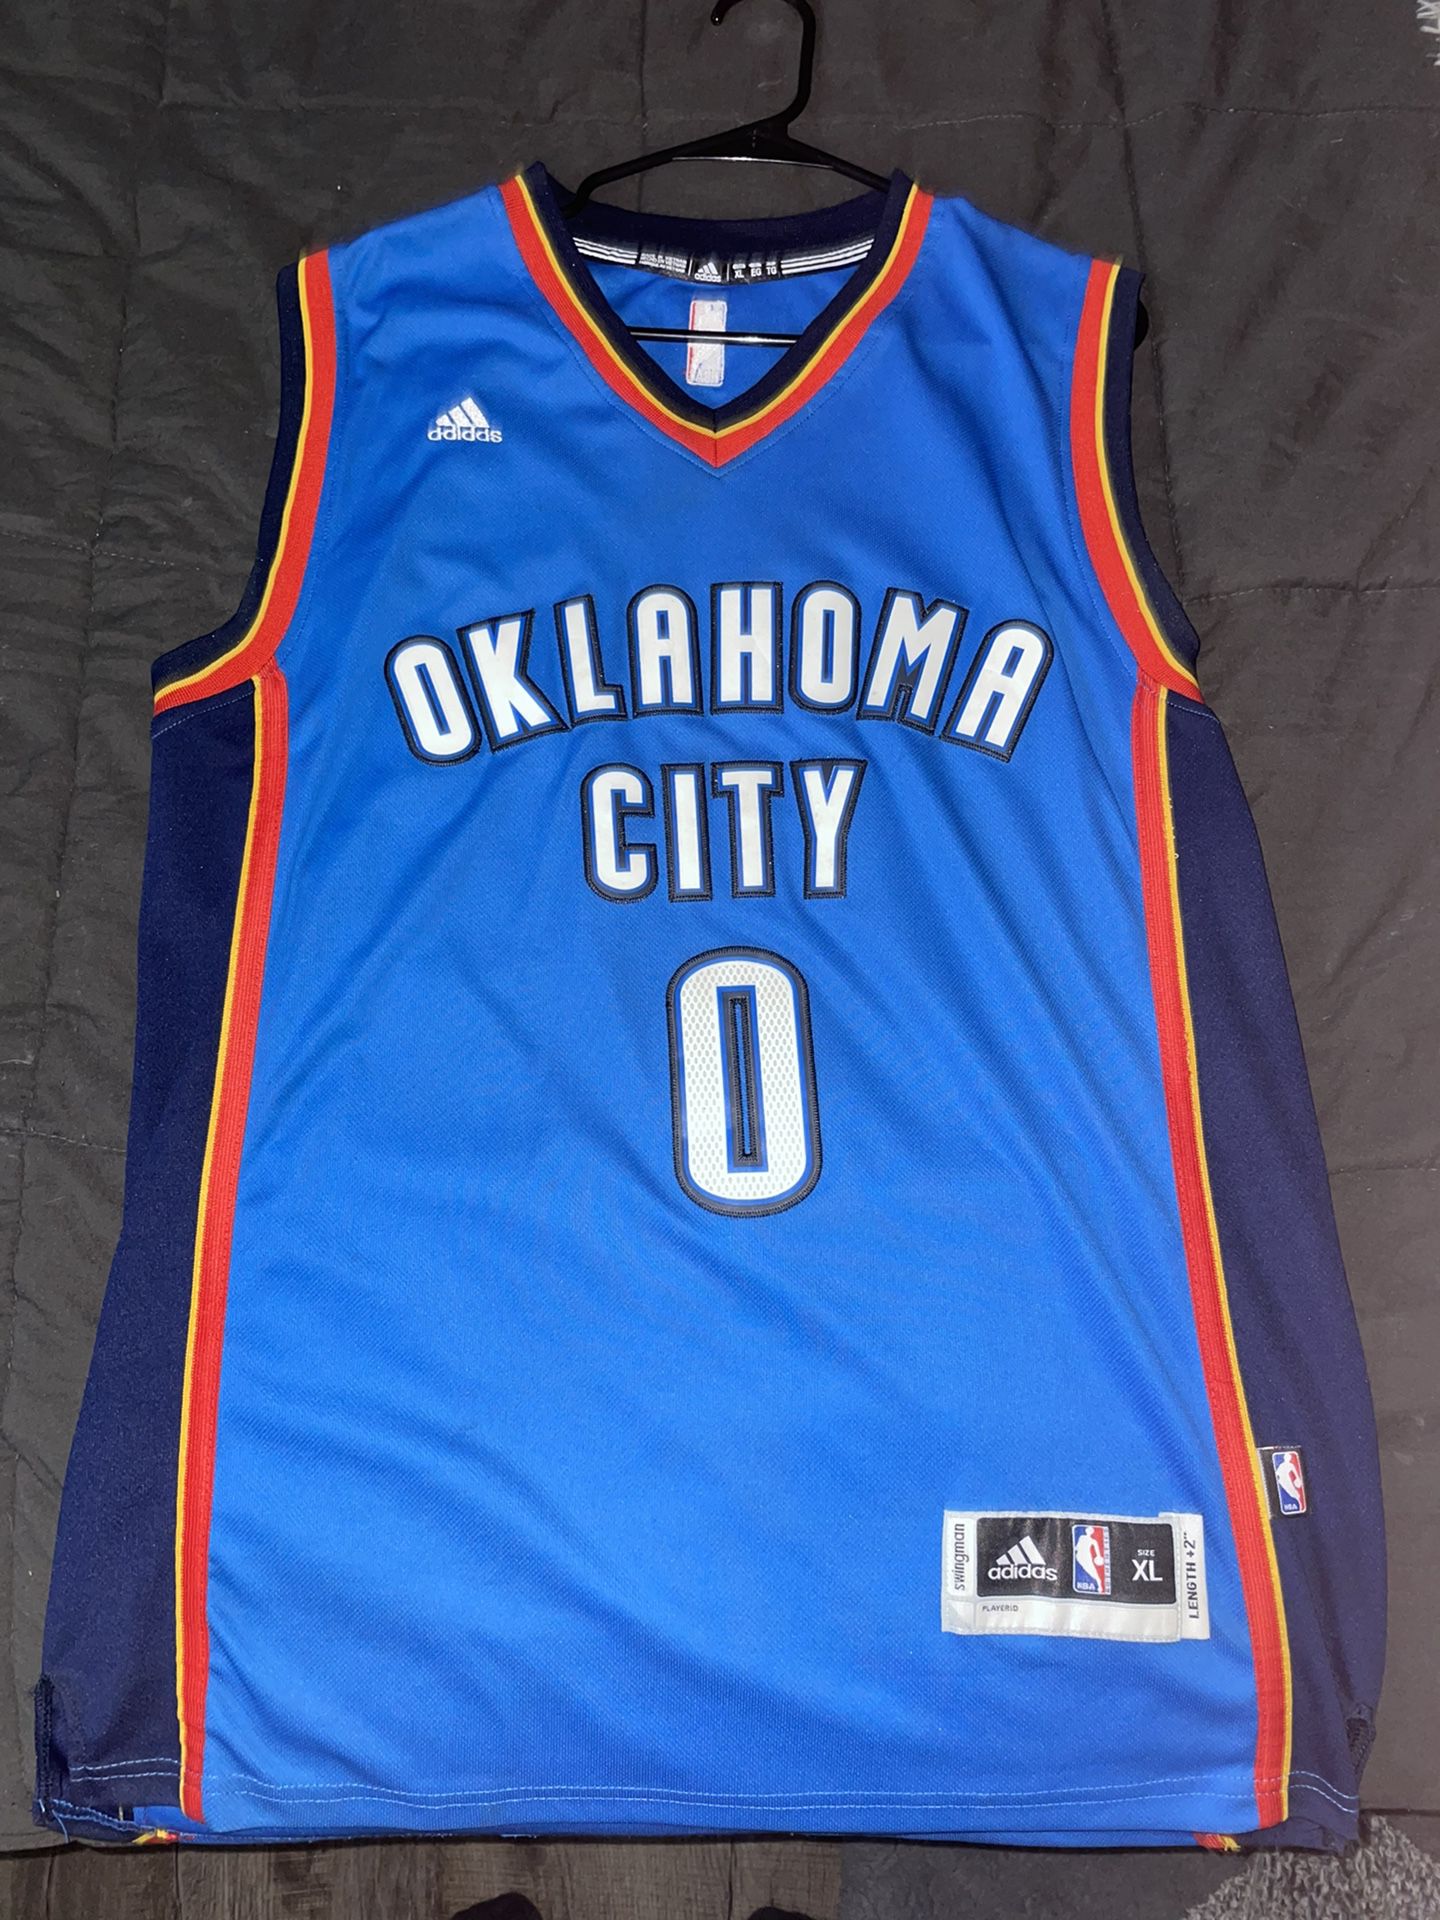 Russell Westbrook #4 Wizards Jersey M-XL for Sale in Corona, CA - OfferUp